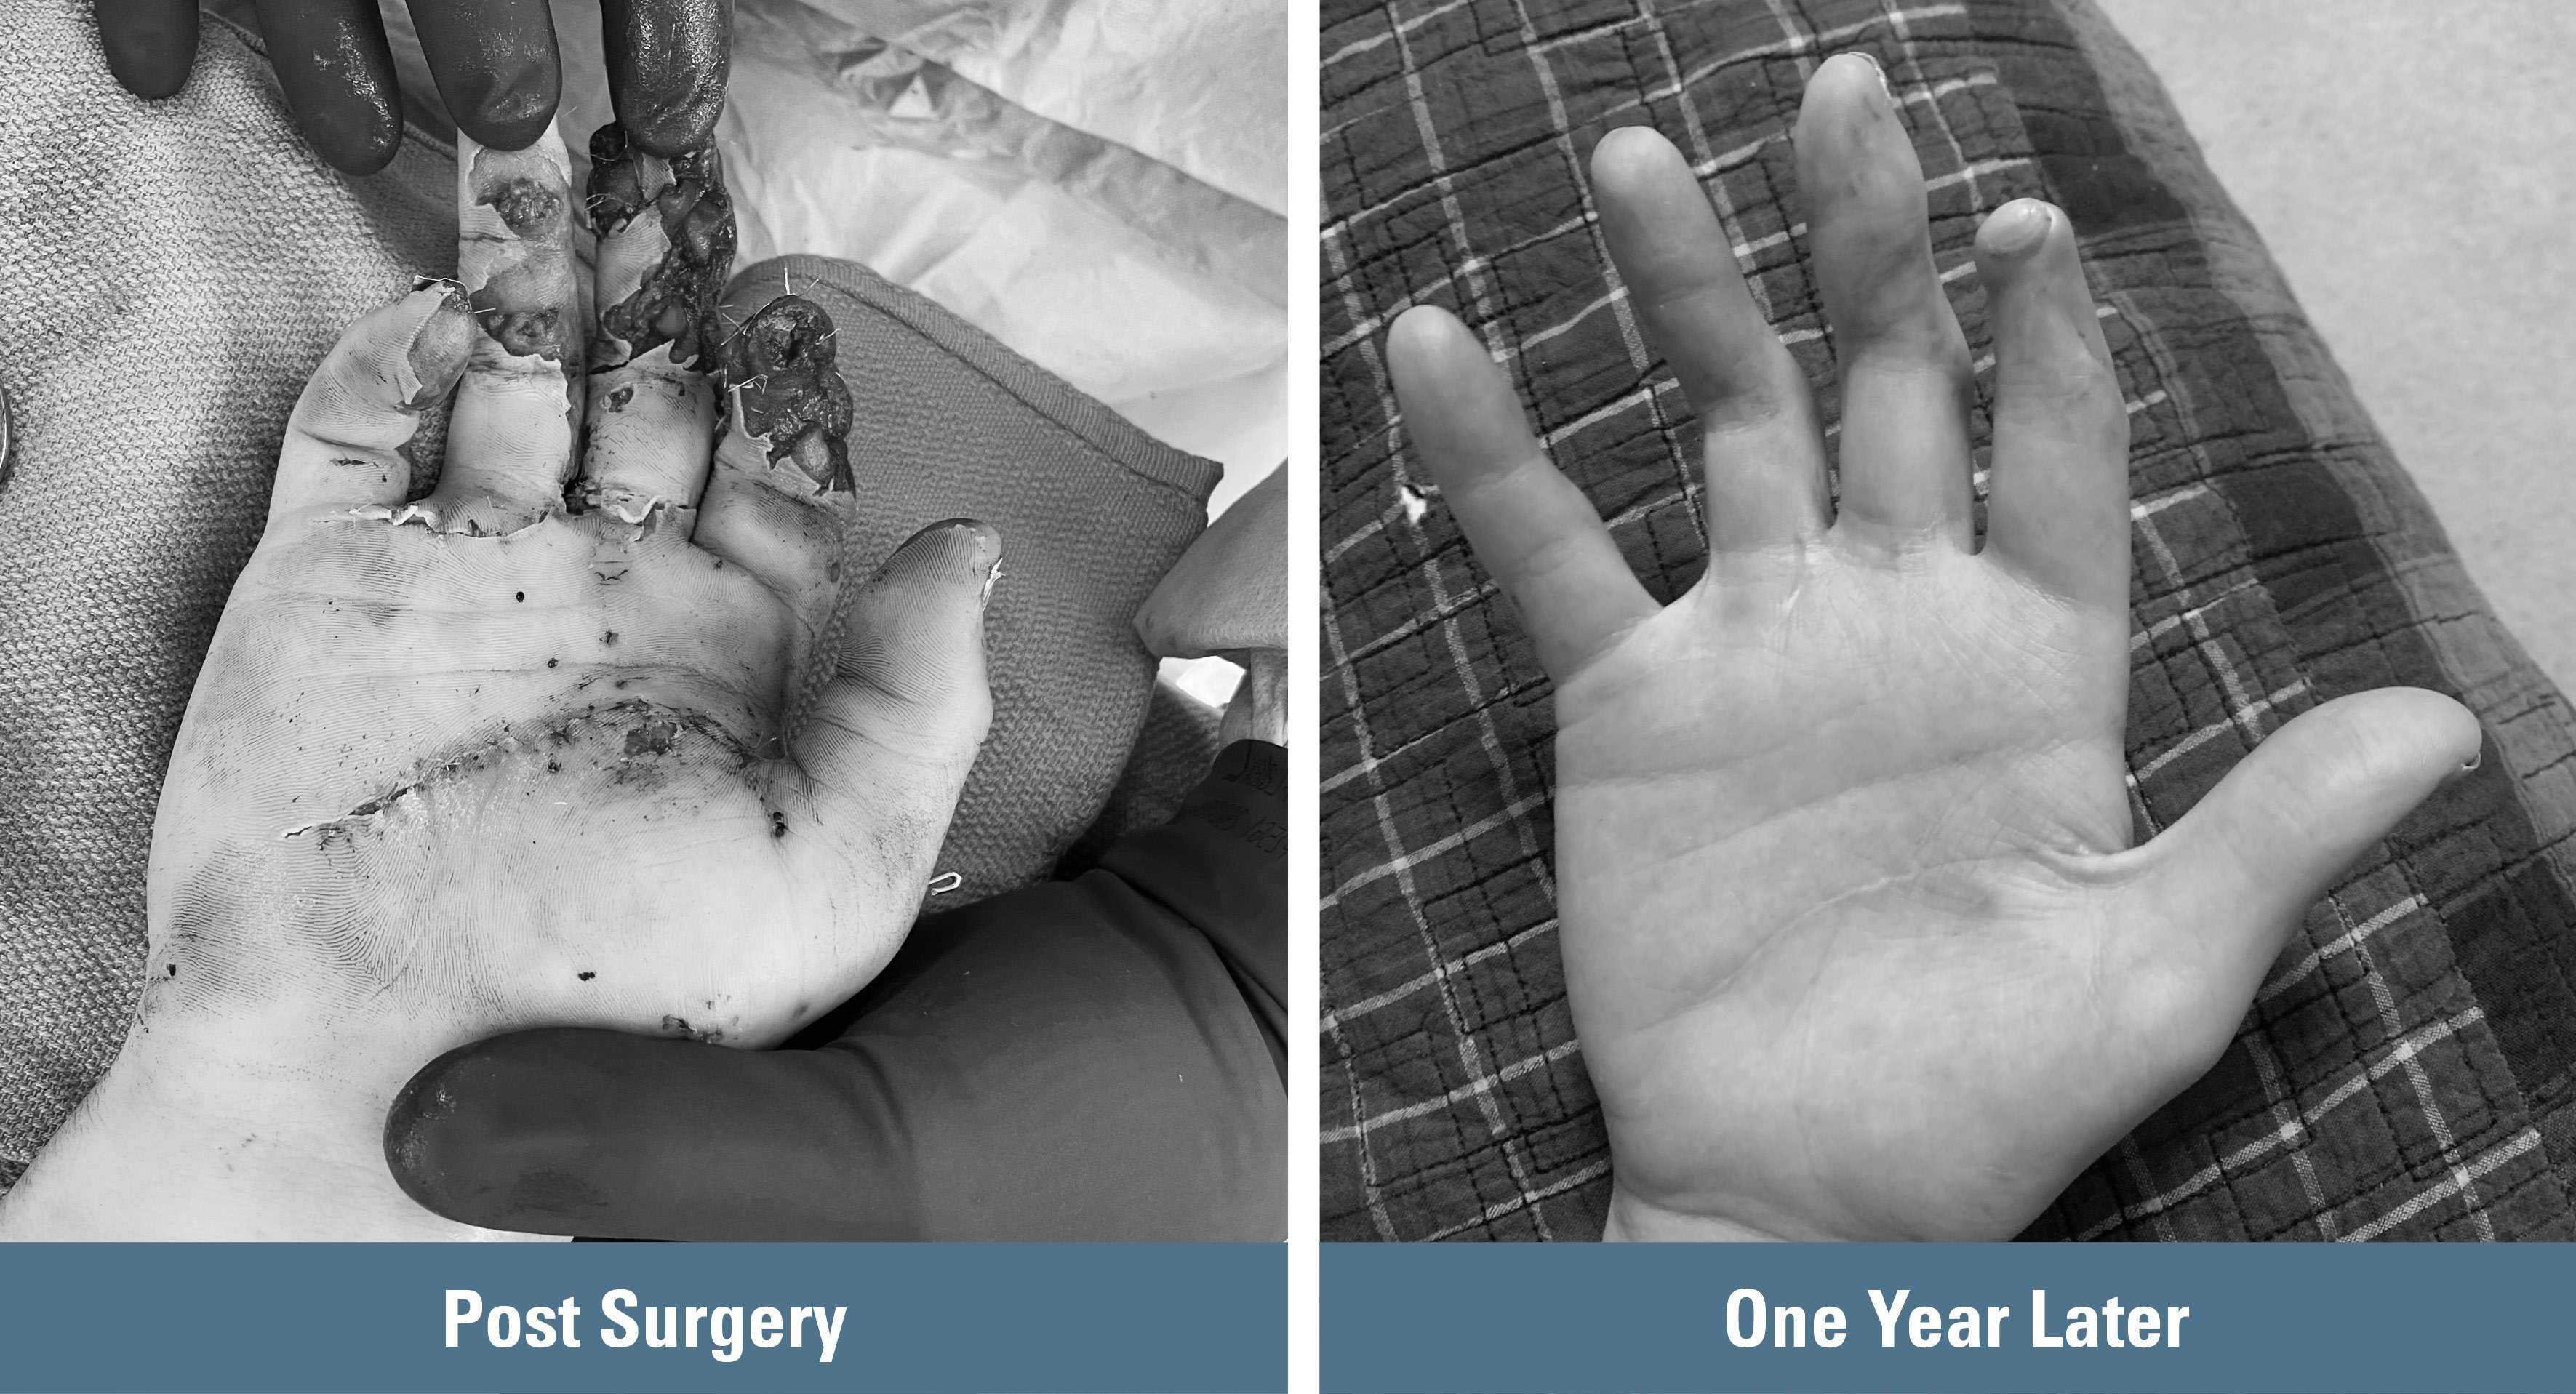 Before-and-after image of Tanner's hand immediately post-surgery, and one year later. (Photo provided by patient)